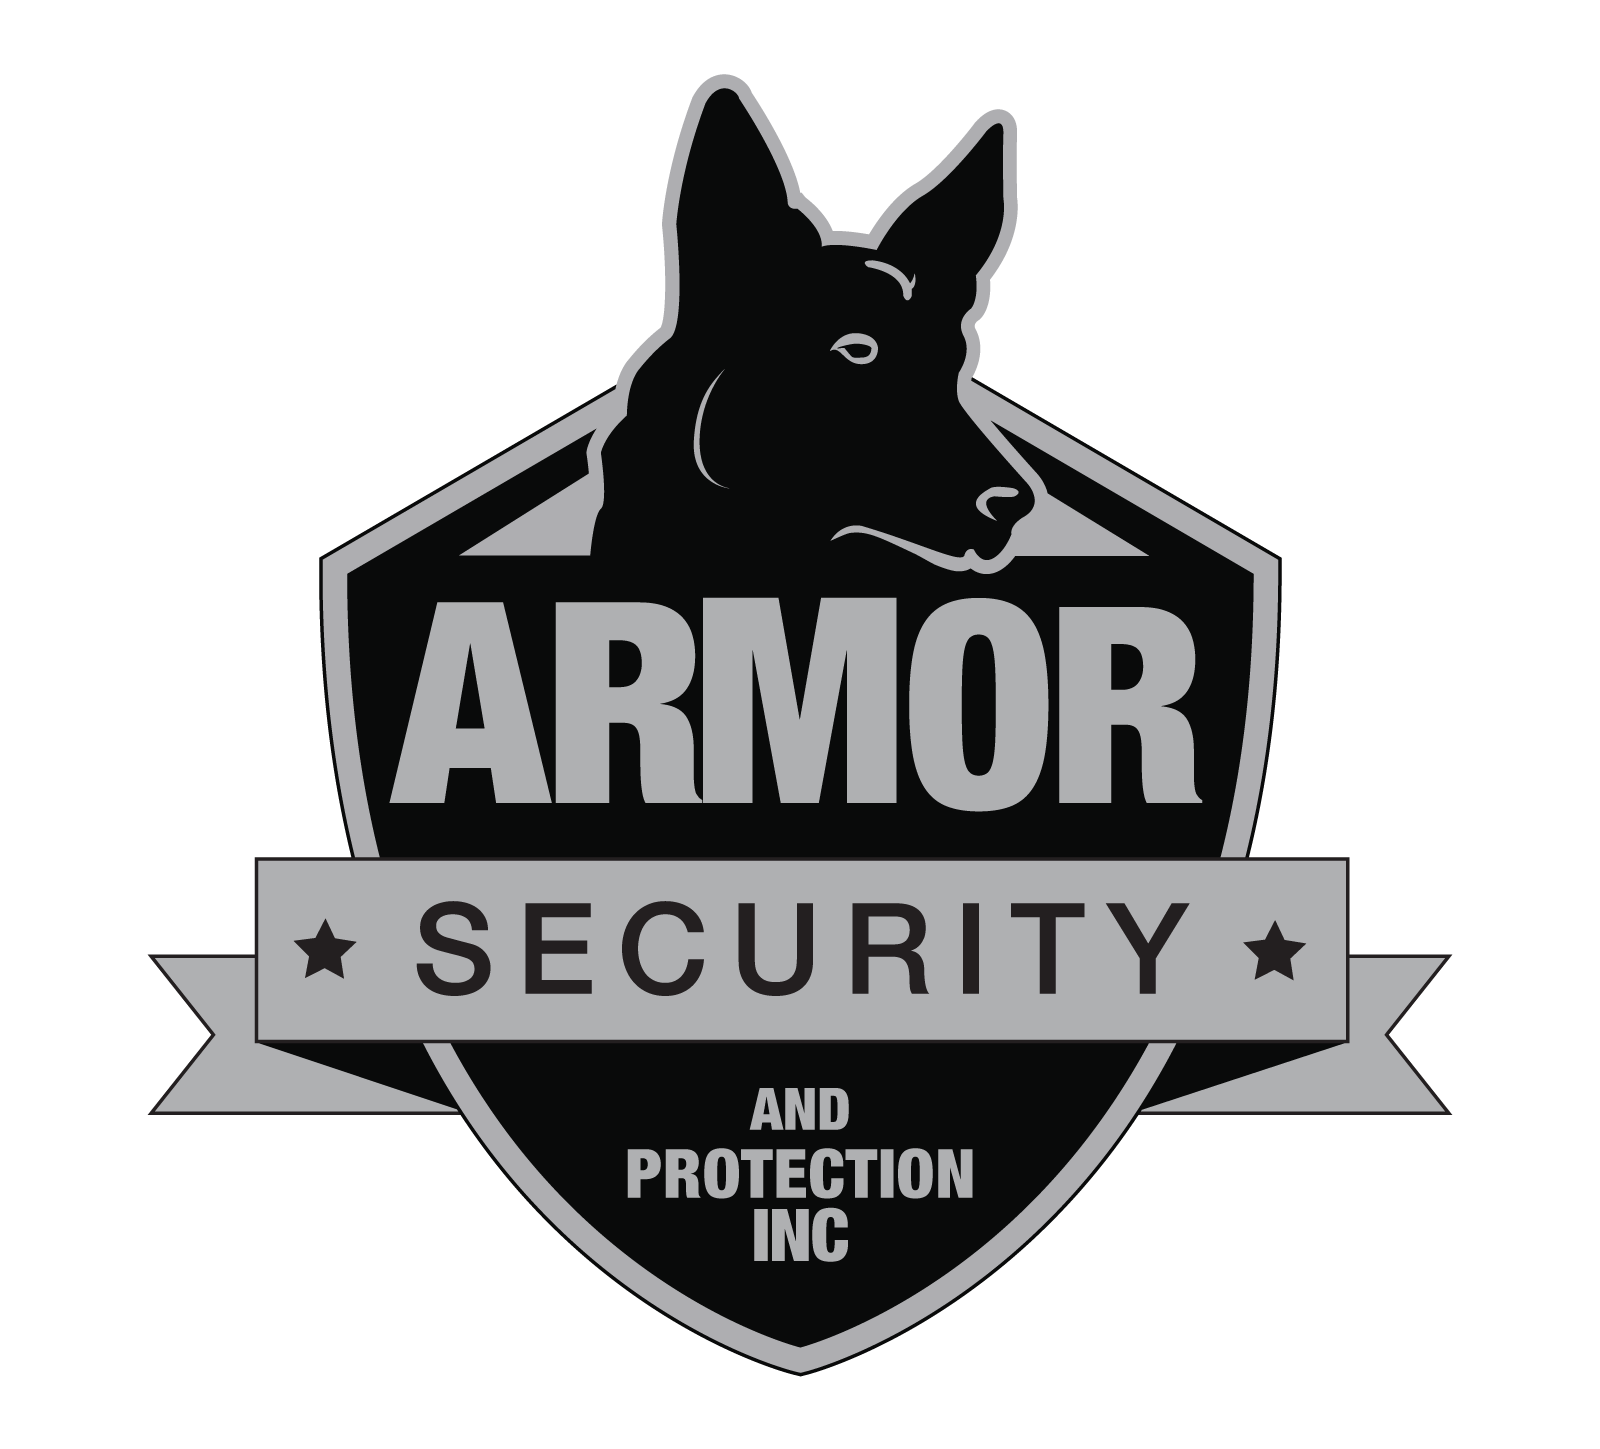 Armor Logo - Armor Security and Protection. Rochester, NY